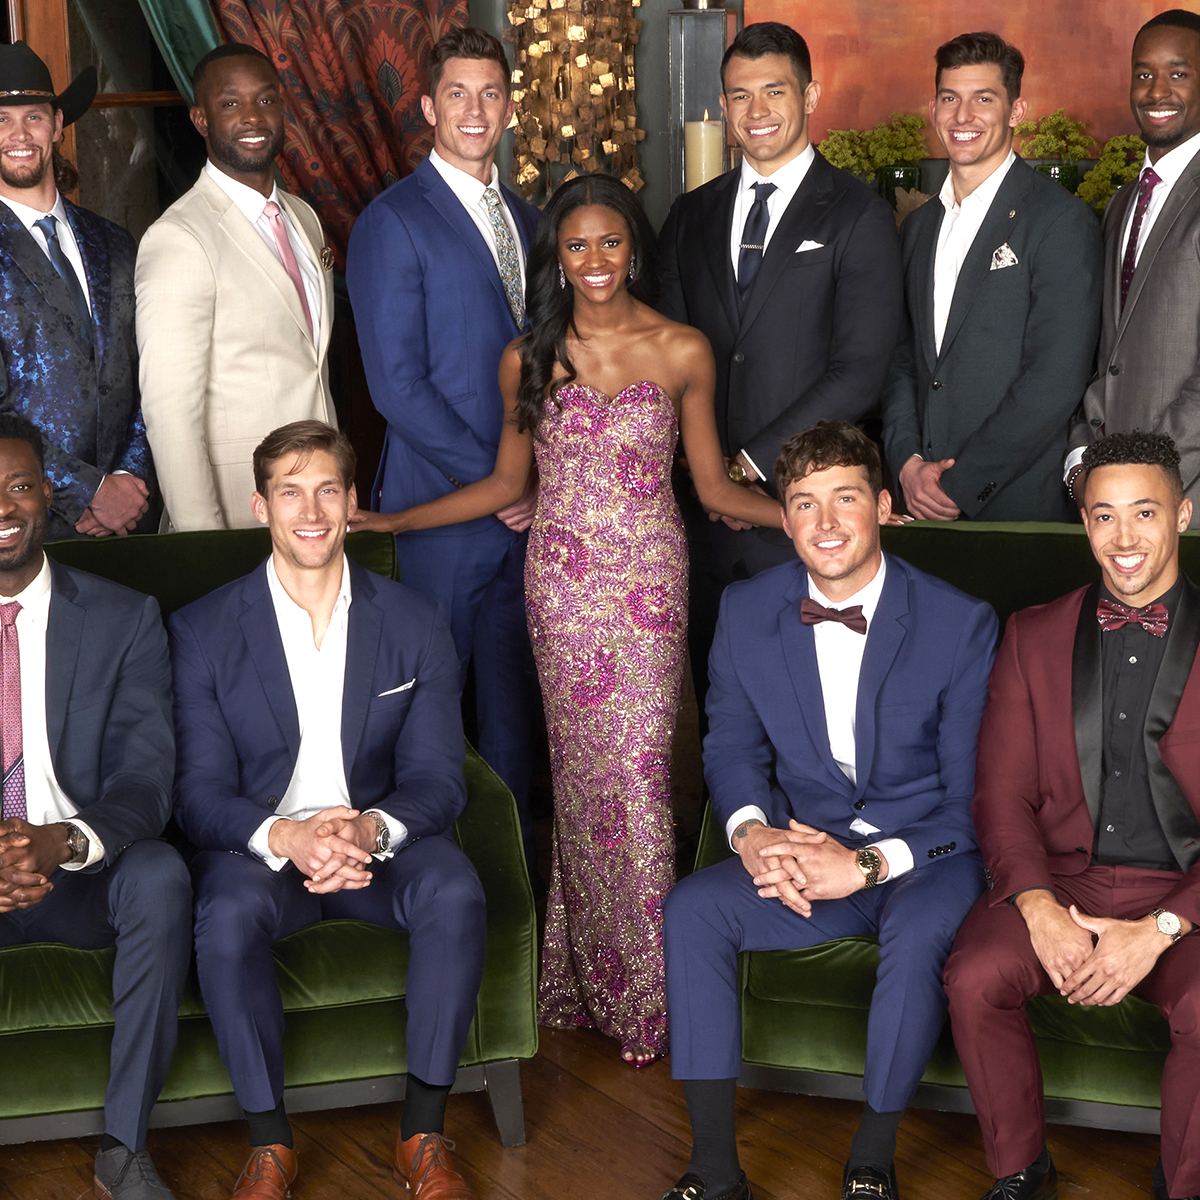 Why Charity Chose That Contestant on The Bachelorette - The Spotted Cat ...